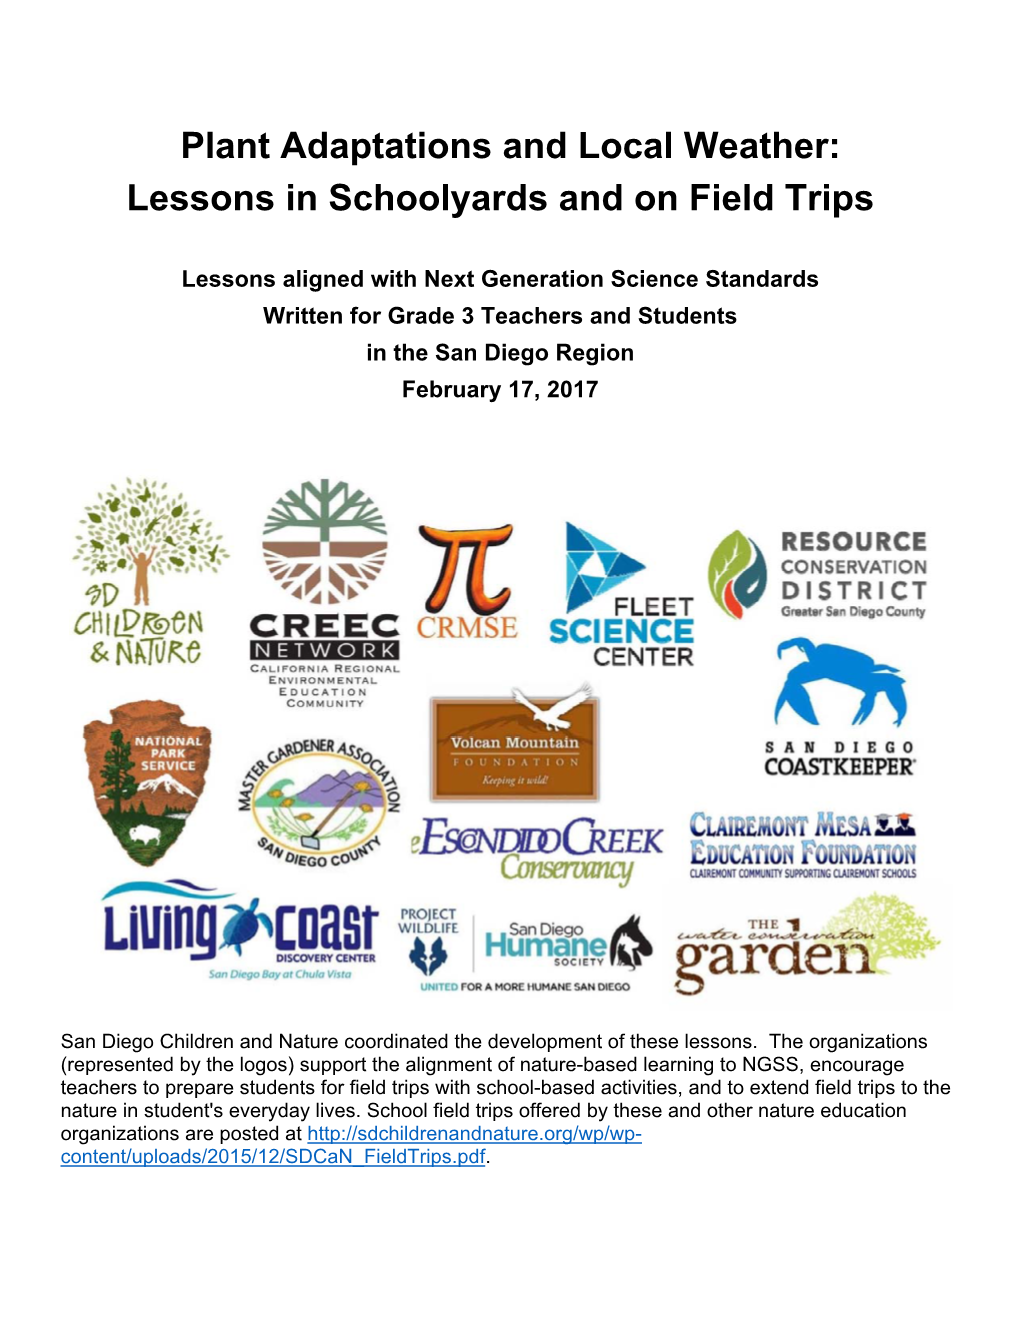 Plant Adaptations and Local Weather: Lessons in Schoolyards and on Field Trips